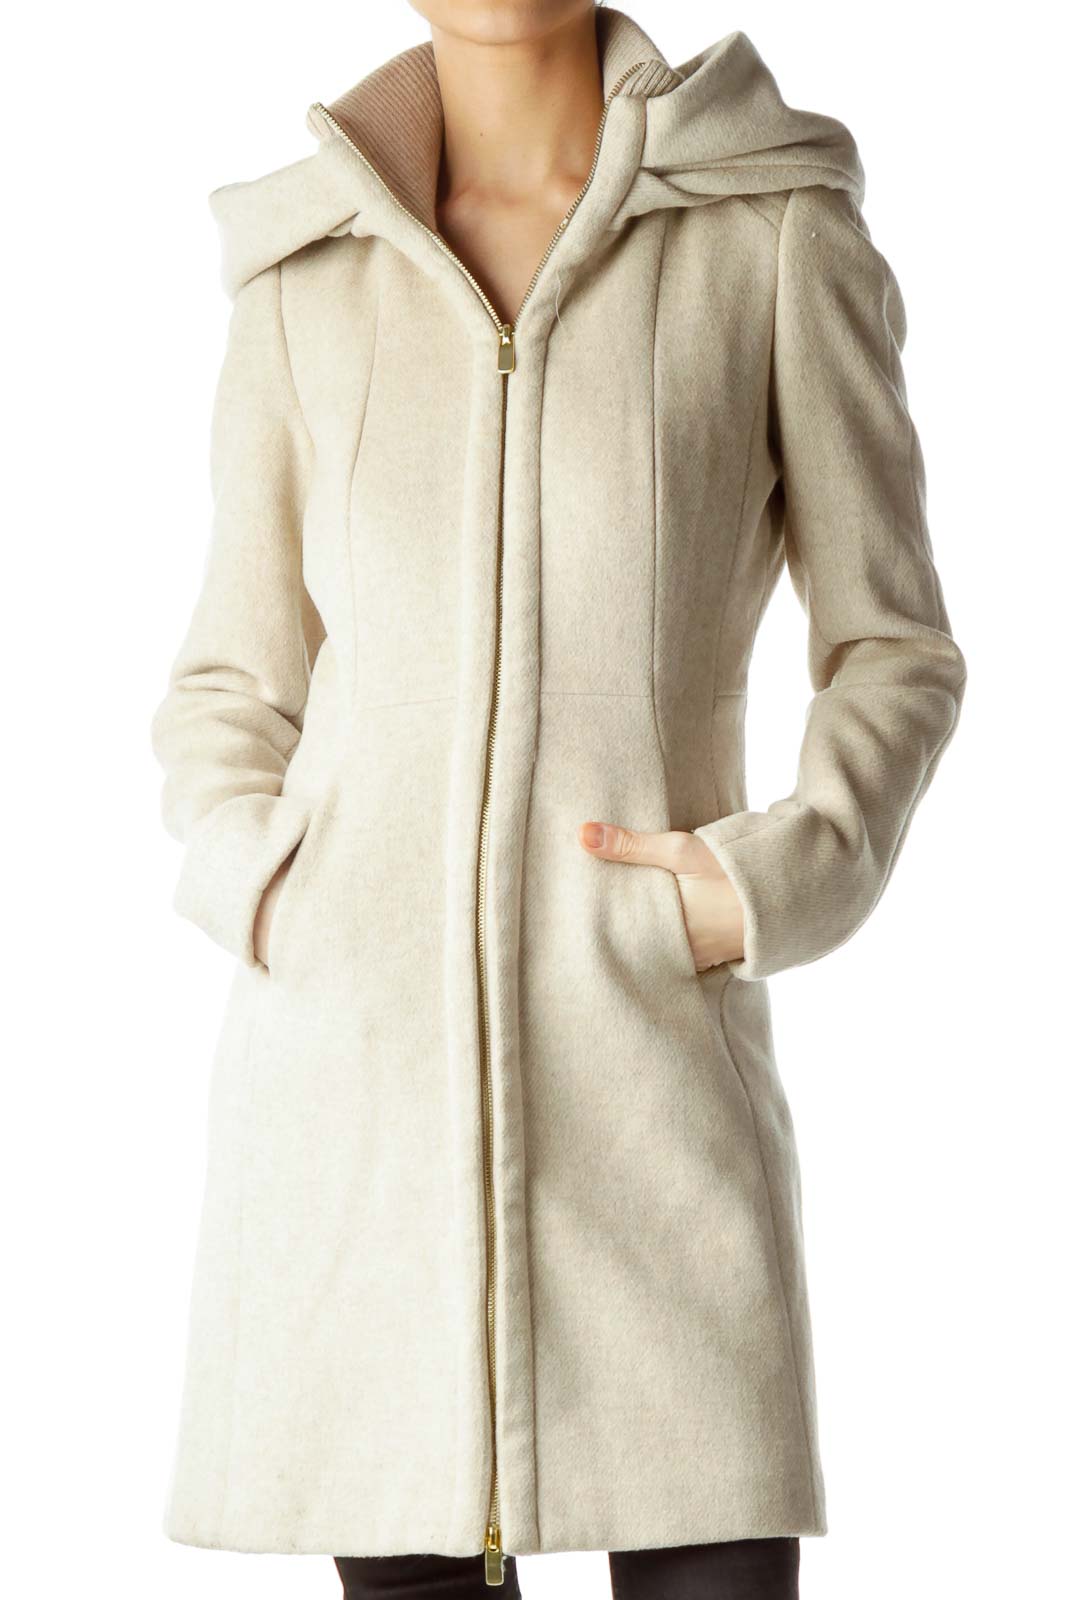 Beige Hooded Coat with Gold Zipper Front